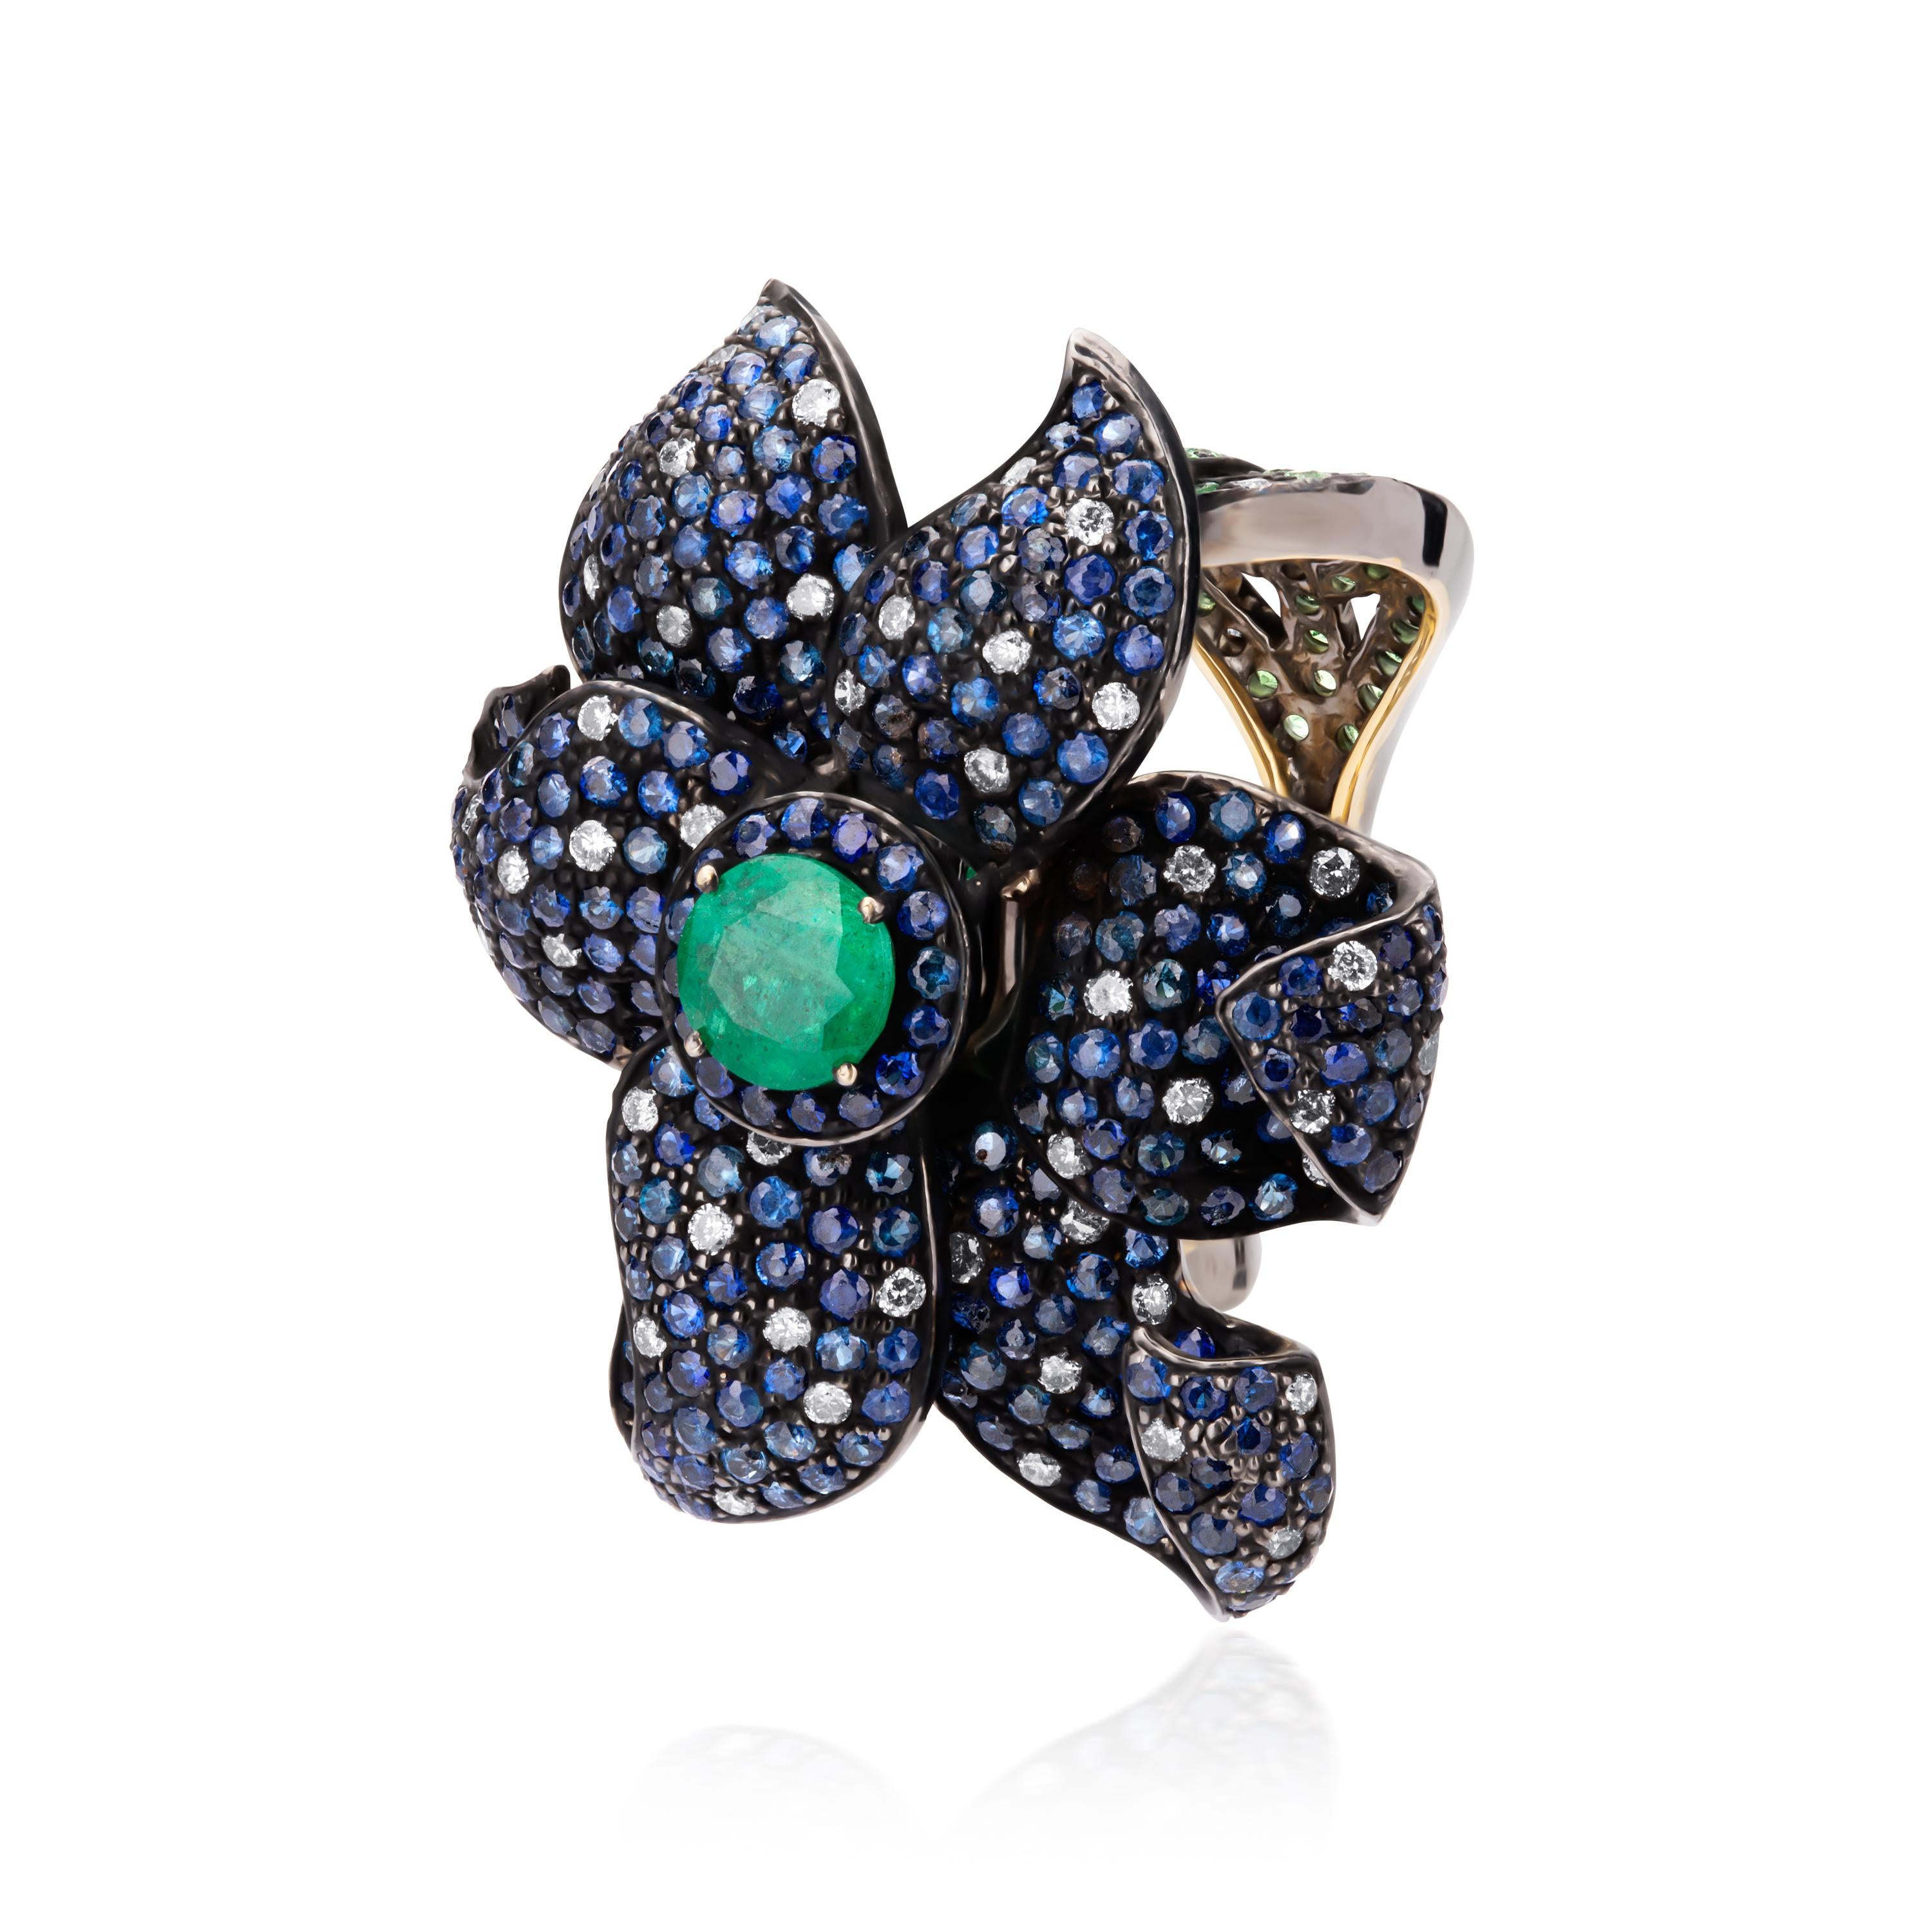 A classic Victorian flower! This extravagant ring features a round faceted emerald at the center of a flower embedded with sparkling blue sapphires. The center flower is accentuated with two bands carved with leaf motifs embellished with tsavorites.